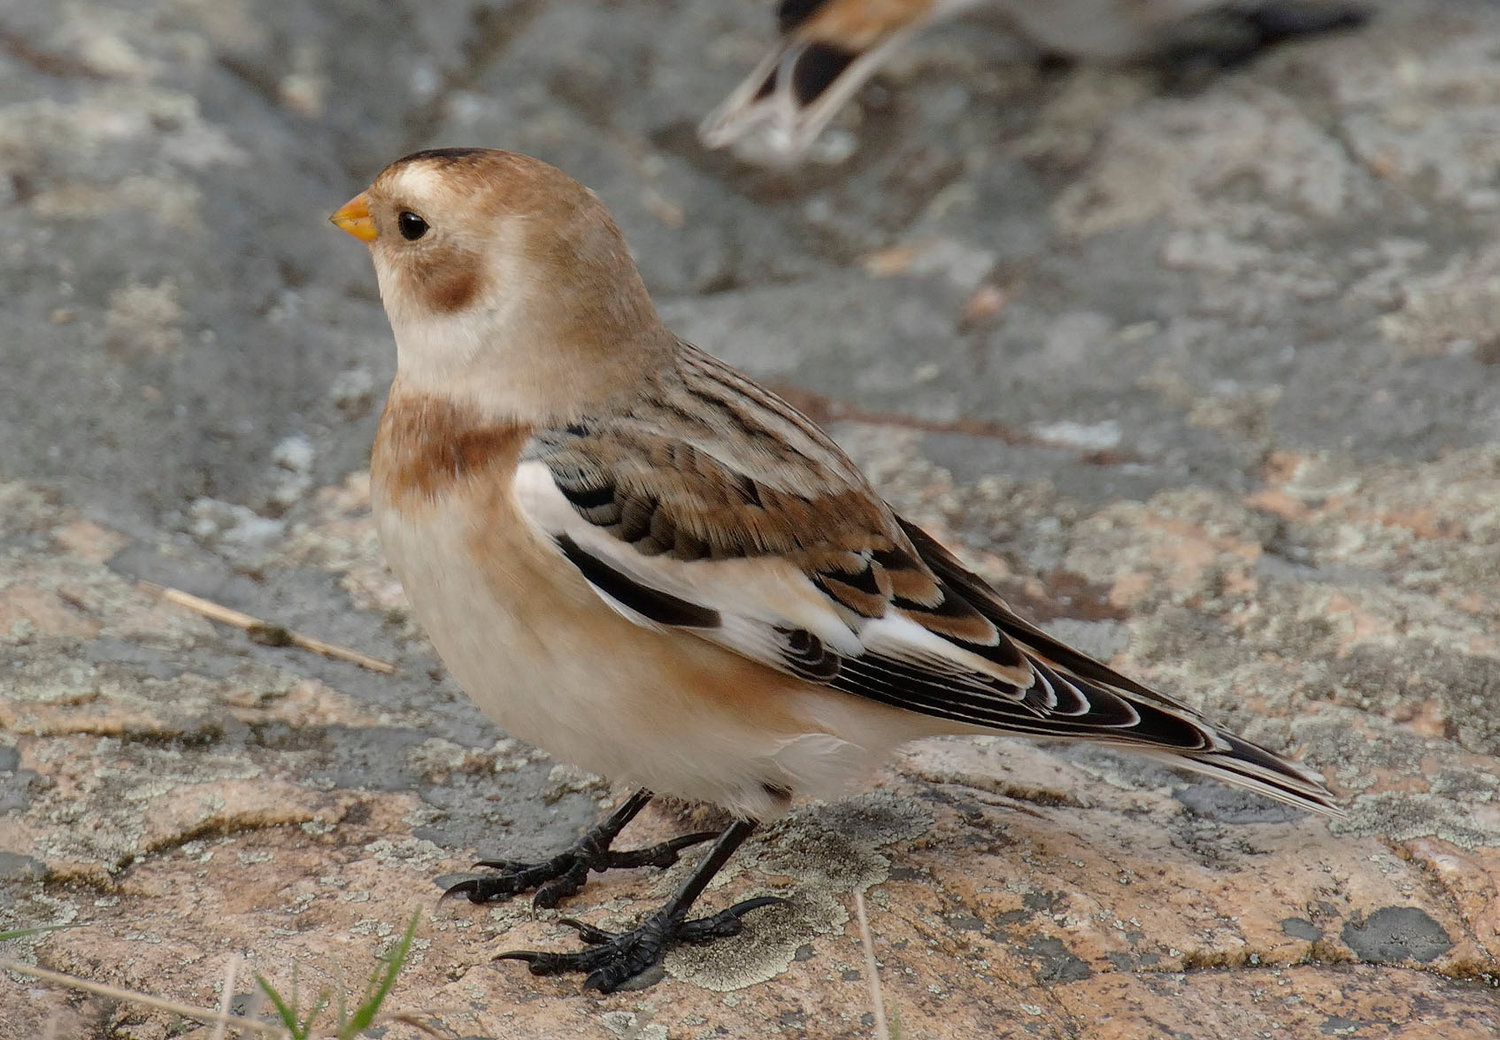 Snow buntings are a winter visitor here; they can be found in bare fields, foraging in crop stubble. They can blend in pretty well thanks to their color, so they could be hard to spot while on the ground. They typically move in large flocks, so they are more easily spotted when moving from place to place. This individual was spotted in the fall along the Appalachian Trail in Sussex County, NJ.